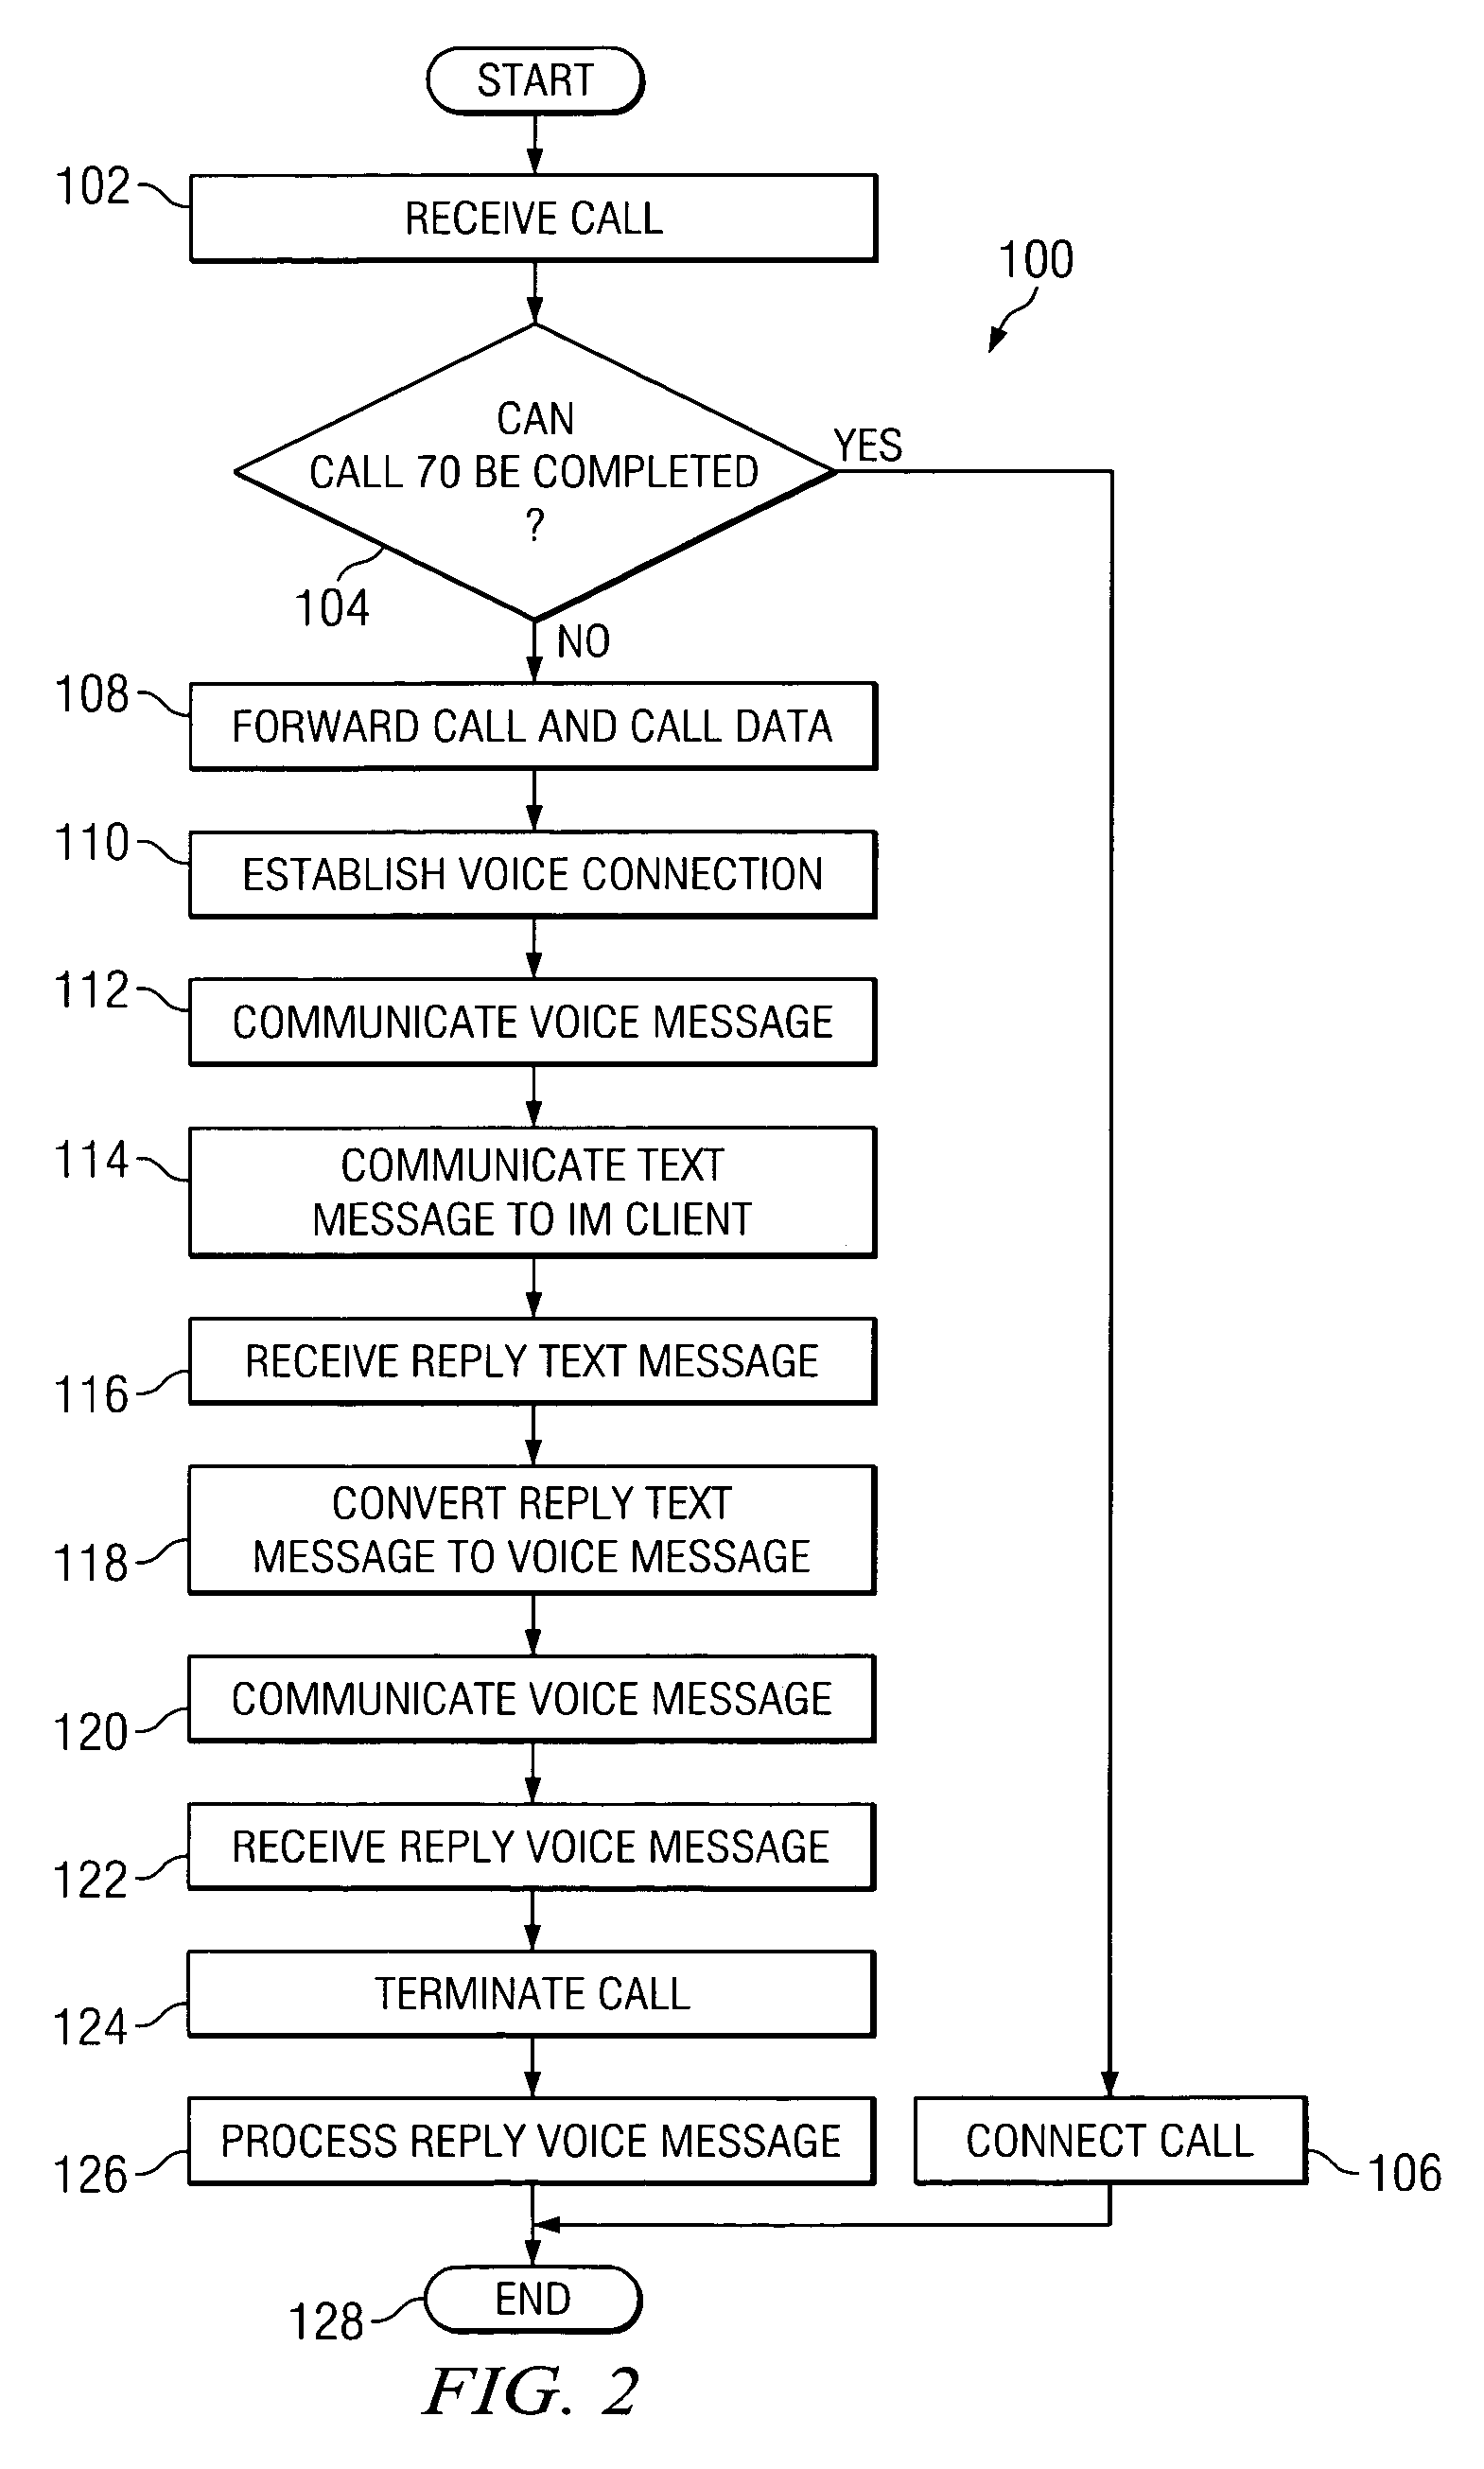 System and method for communicating messages between a text-based client and a voice-based client